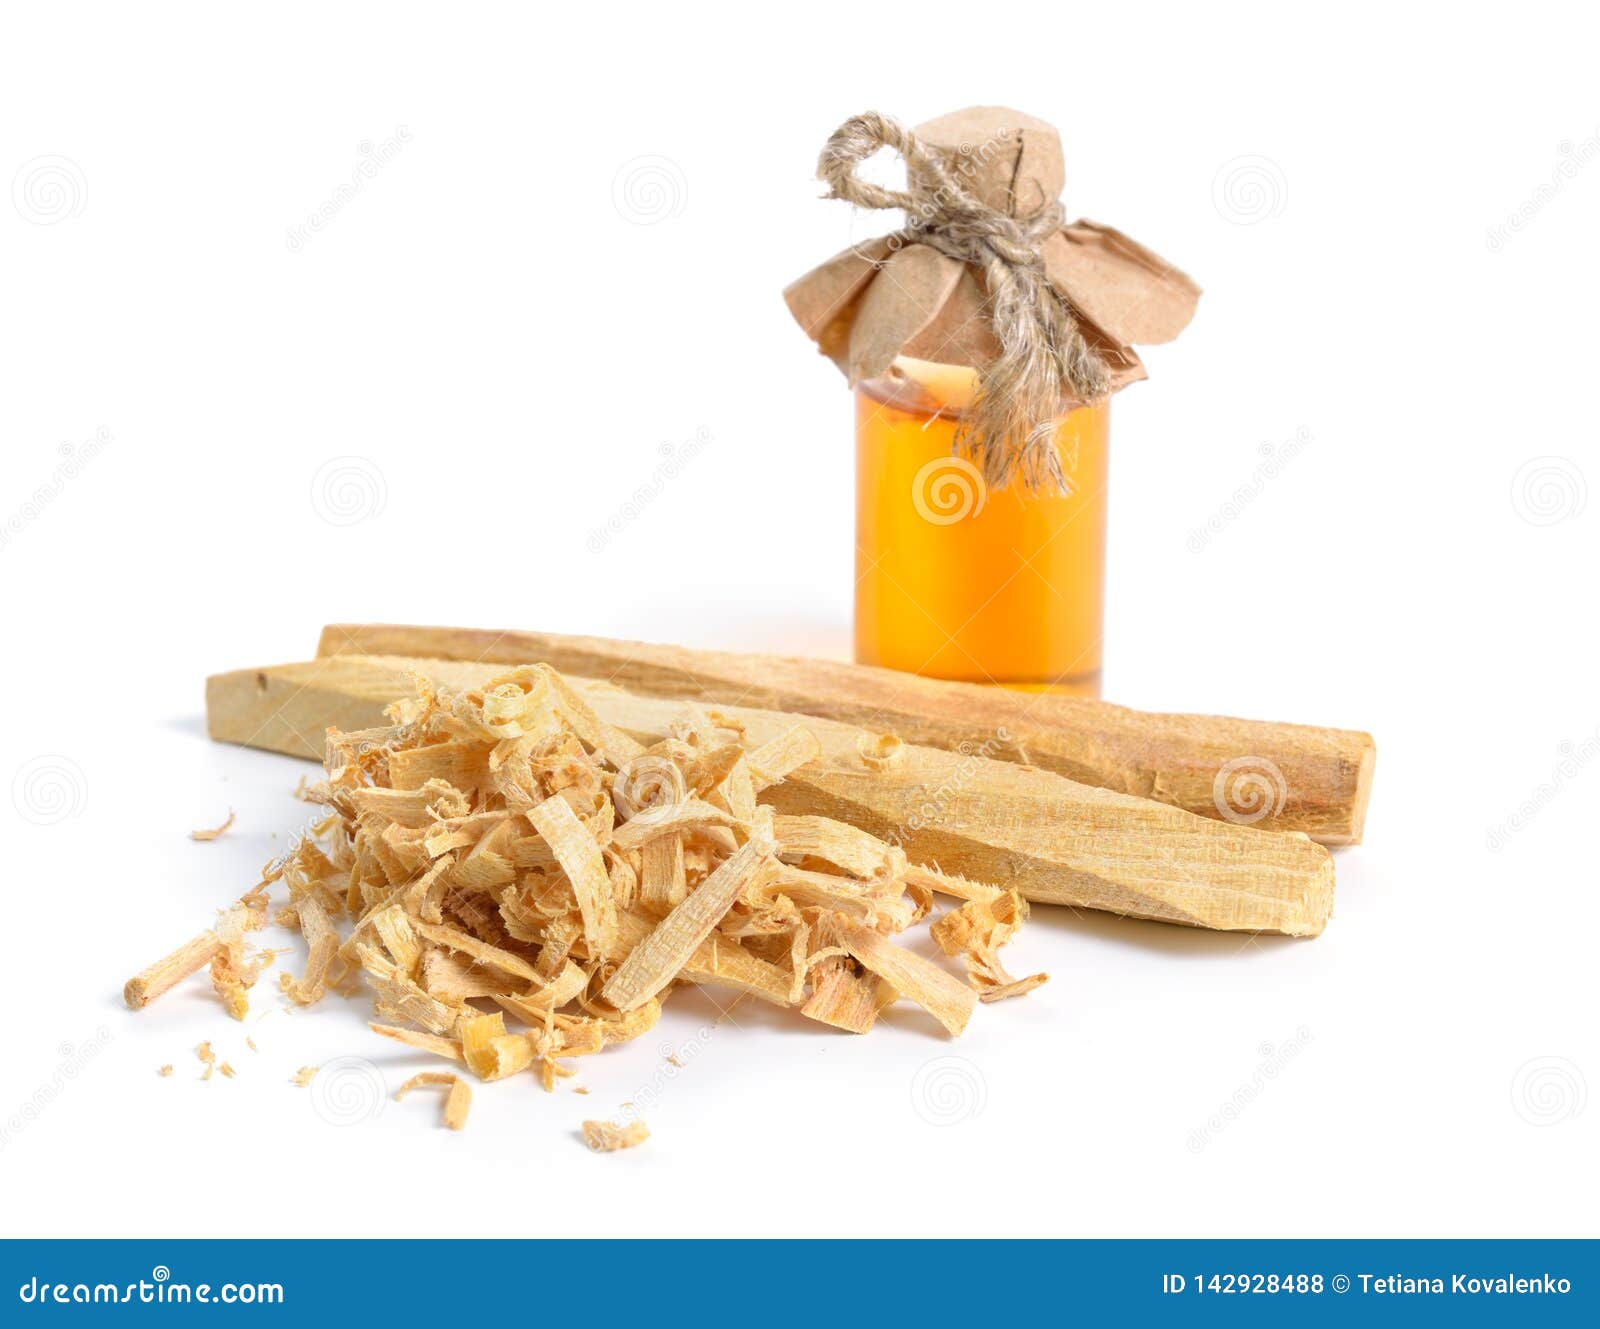 palo santo, holy wood sticks with essential oil.  on white background.